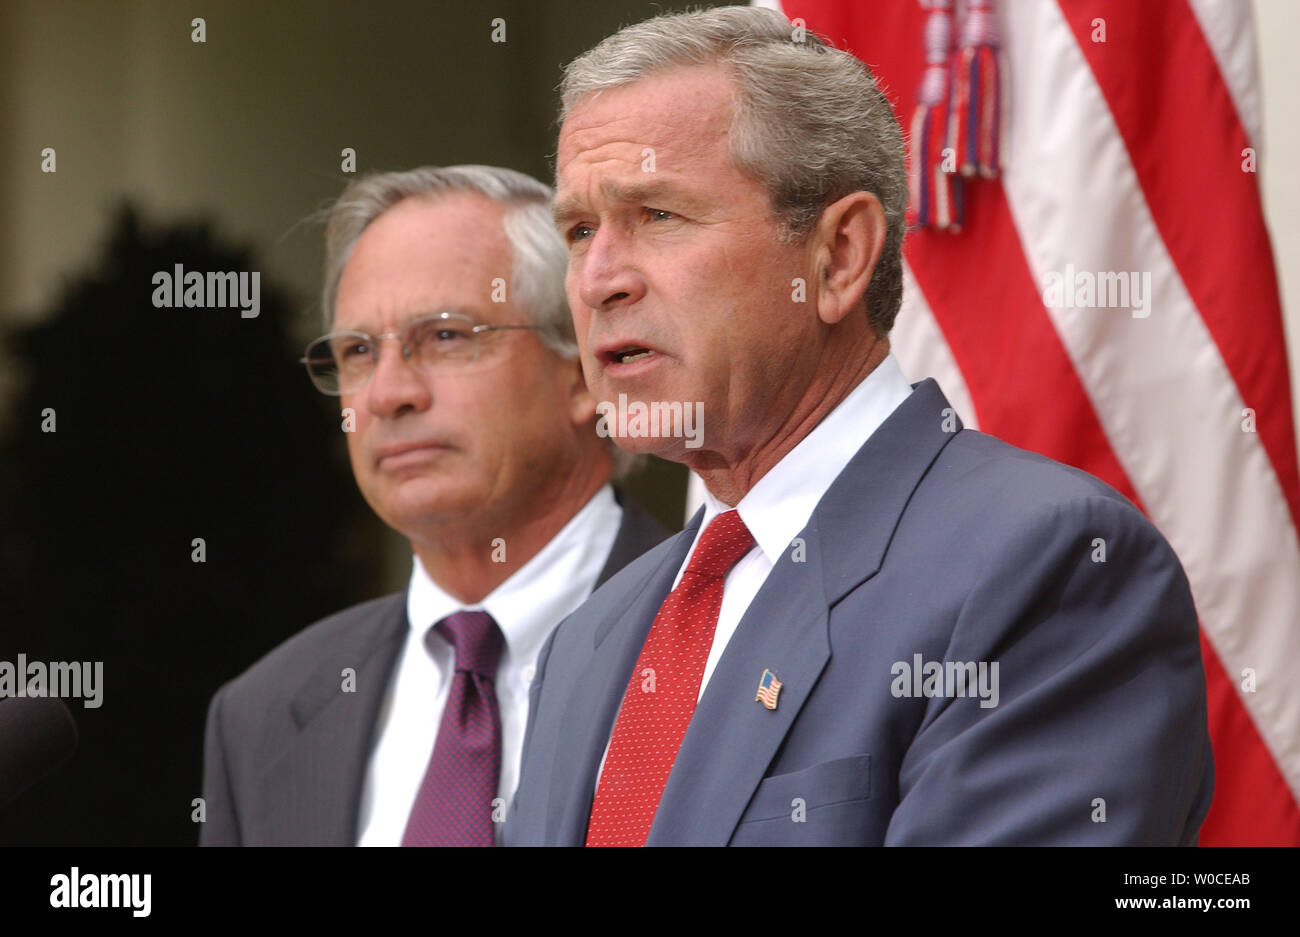 President George W. Bush announces to members of the press that he is nominating Rep. Porter Goss, left, R-FL, as the new head of the CIA, on August 10, 2004 in Washington. Goss is a former member of the CIA and sits on the House of Representatives Intelligence Committee. (UPI Photo/Michael Kleinfeld) Stock Photo